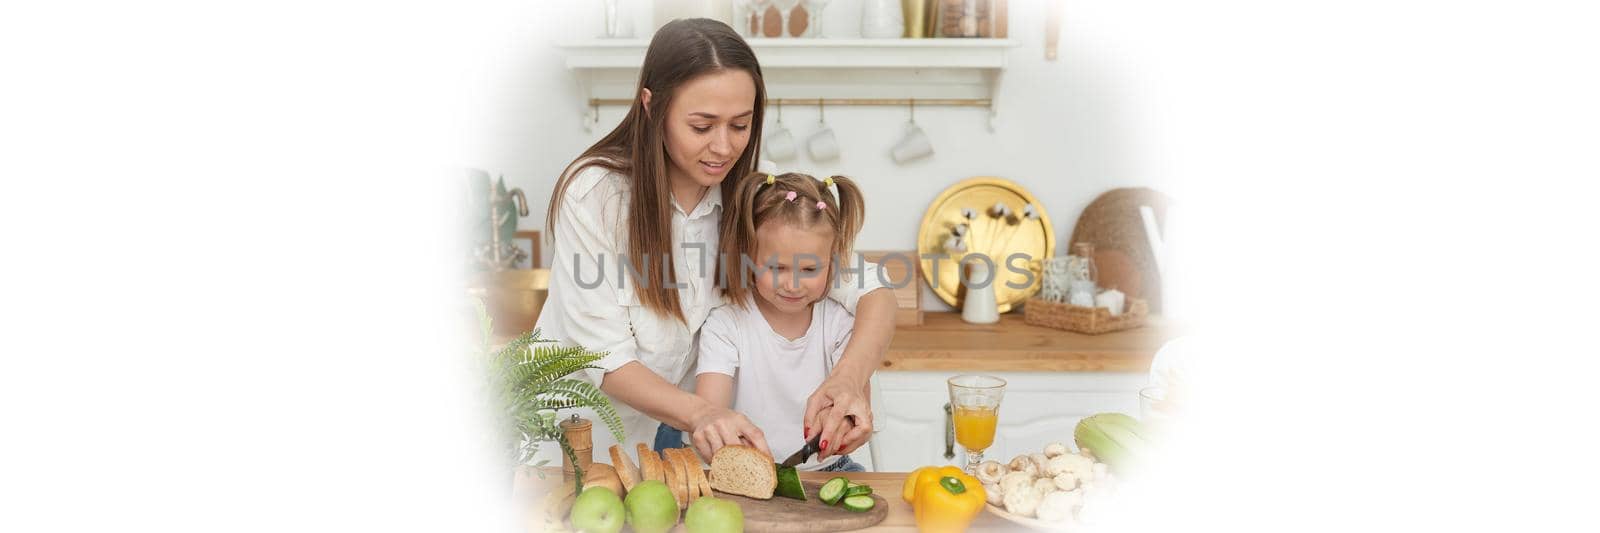 Mom controls her daughter's cutting vegetables. Cooking training. Web banner.